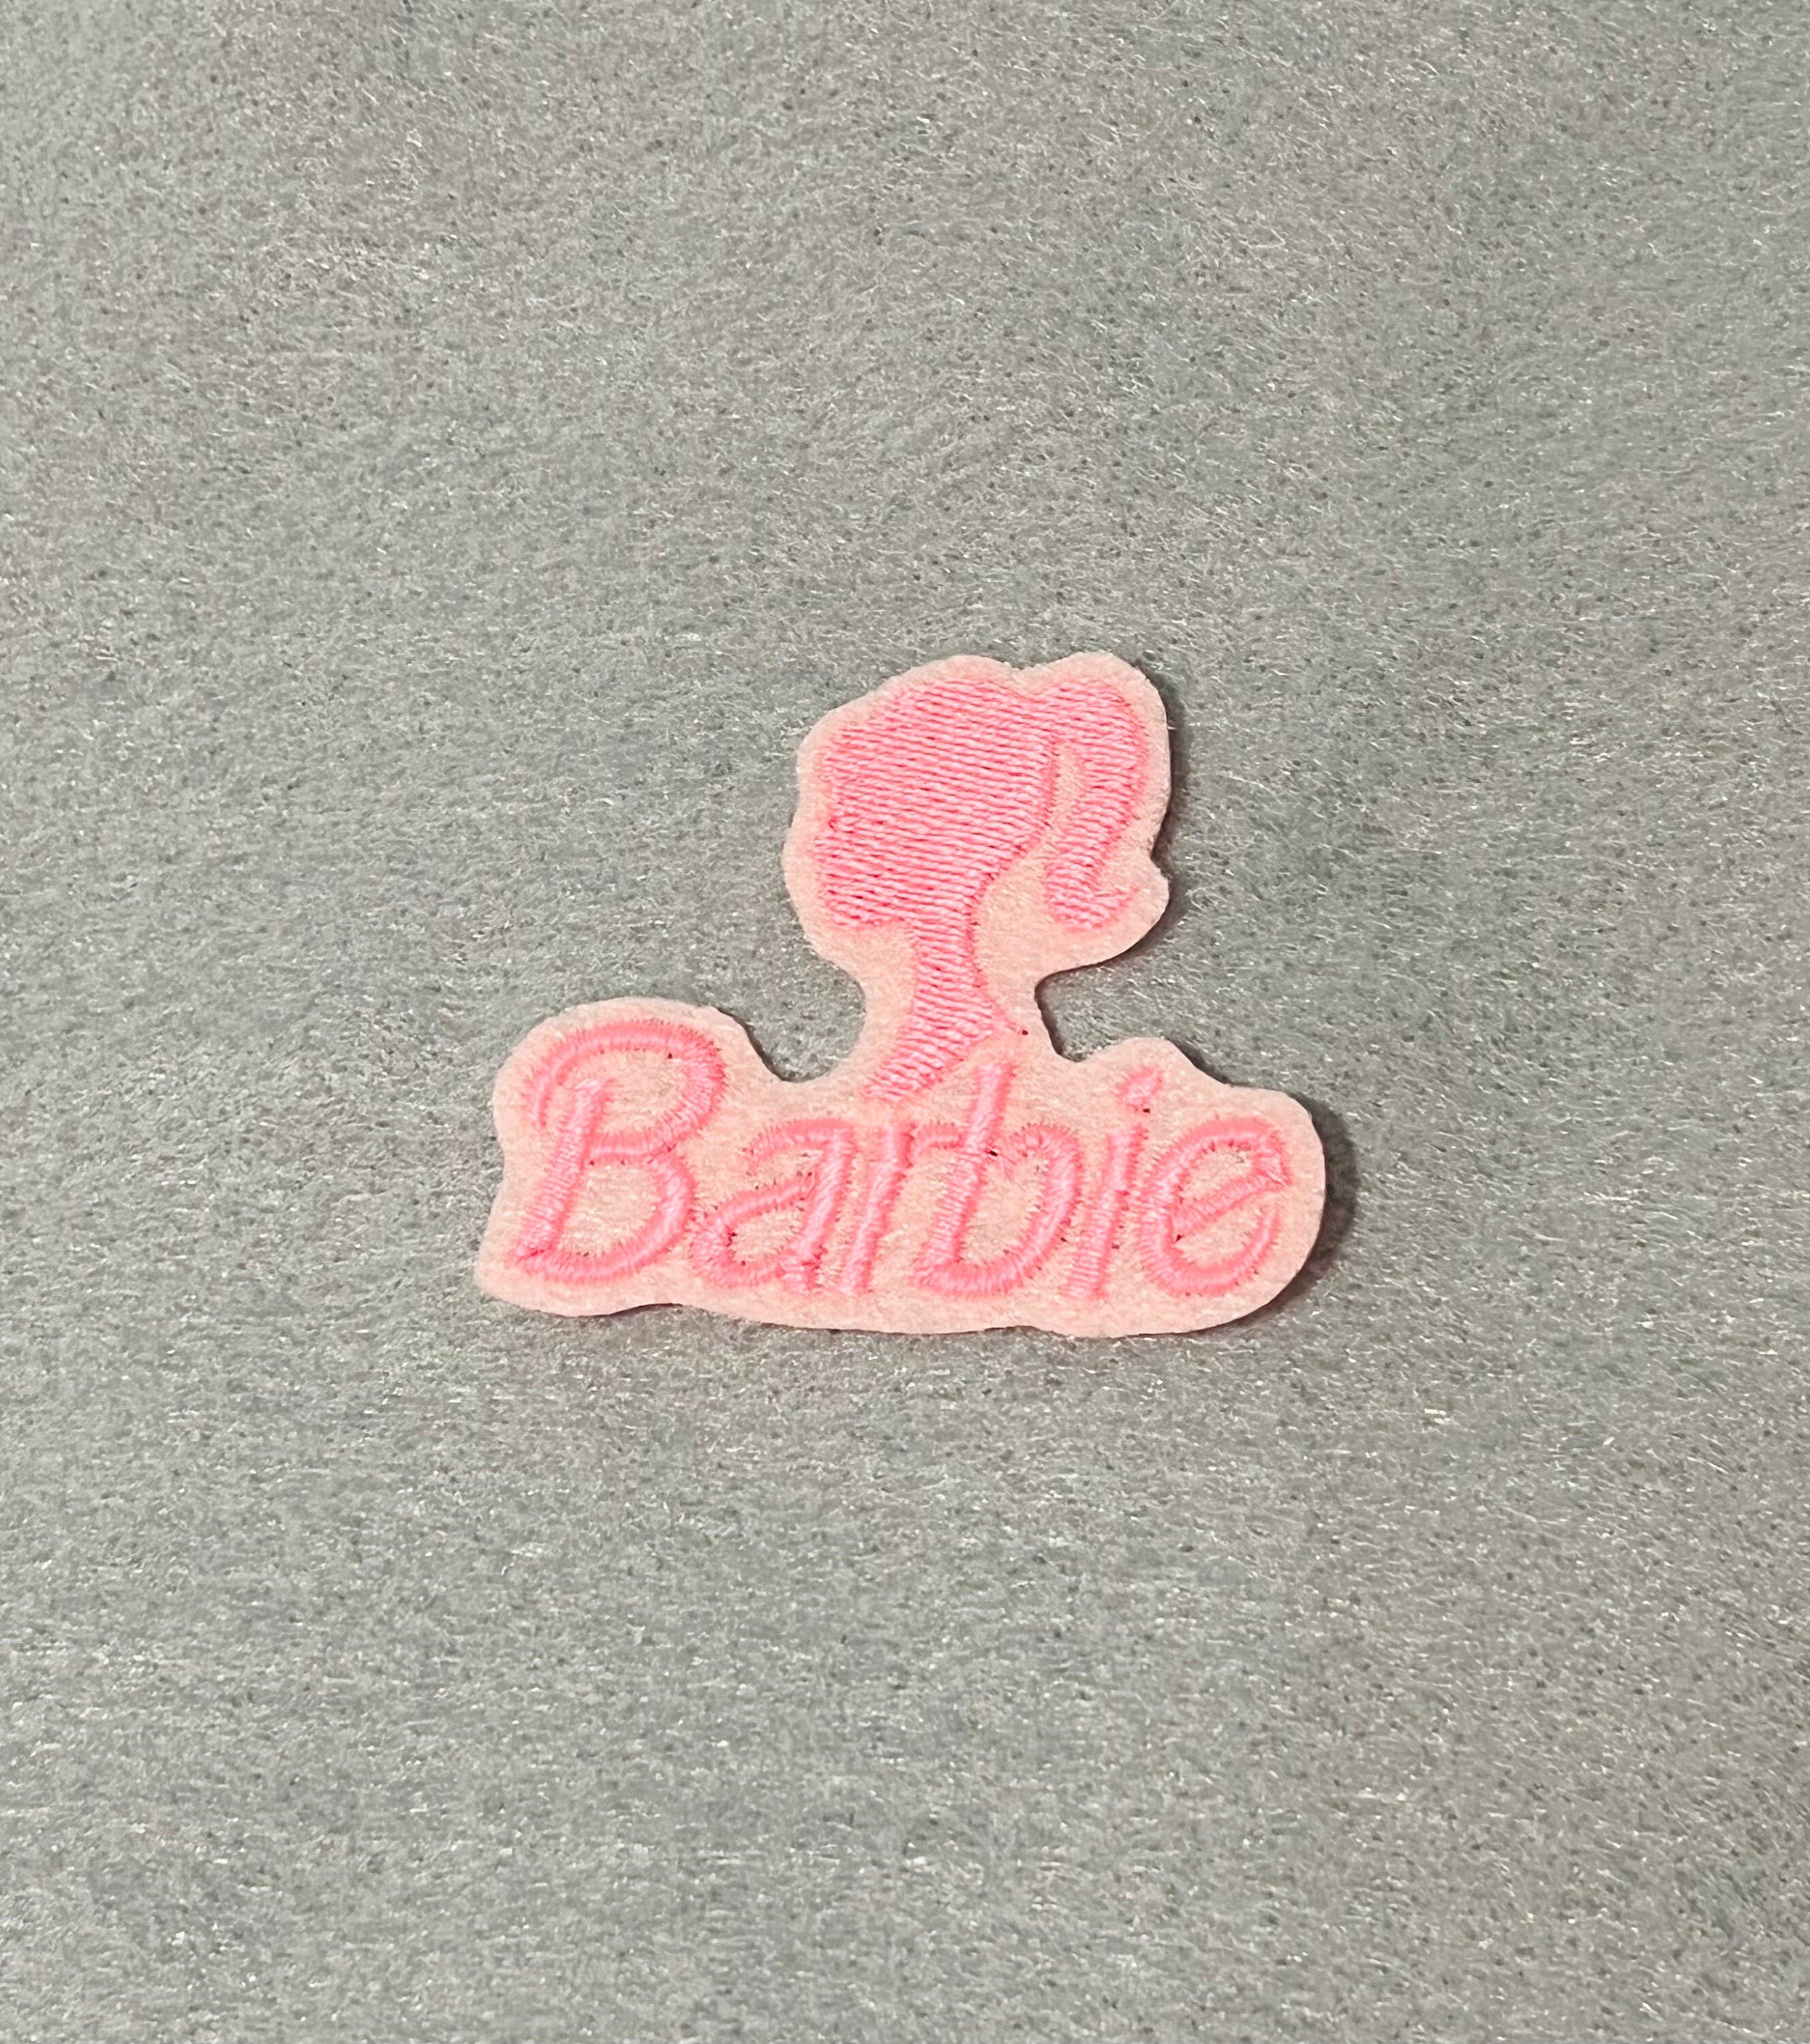 Fabric Iron On Barbie Style Silhouette Applique